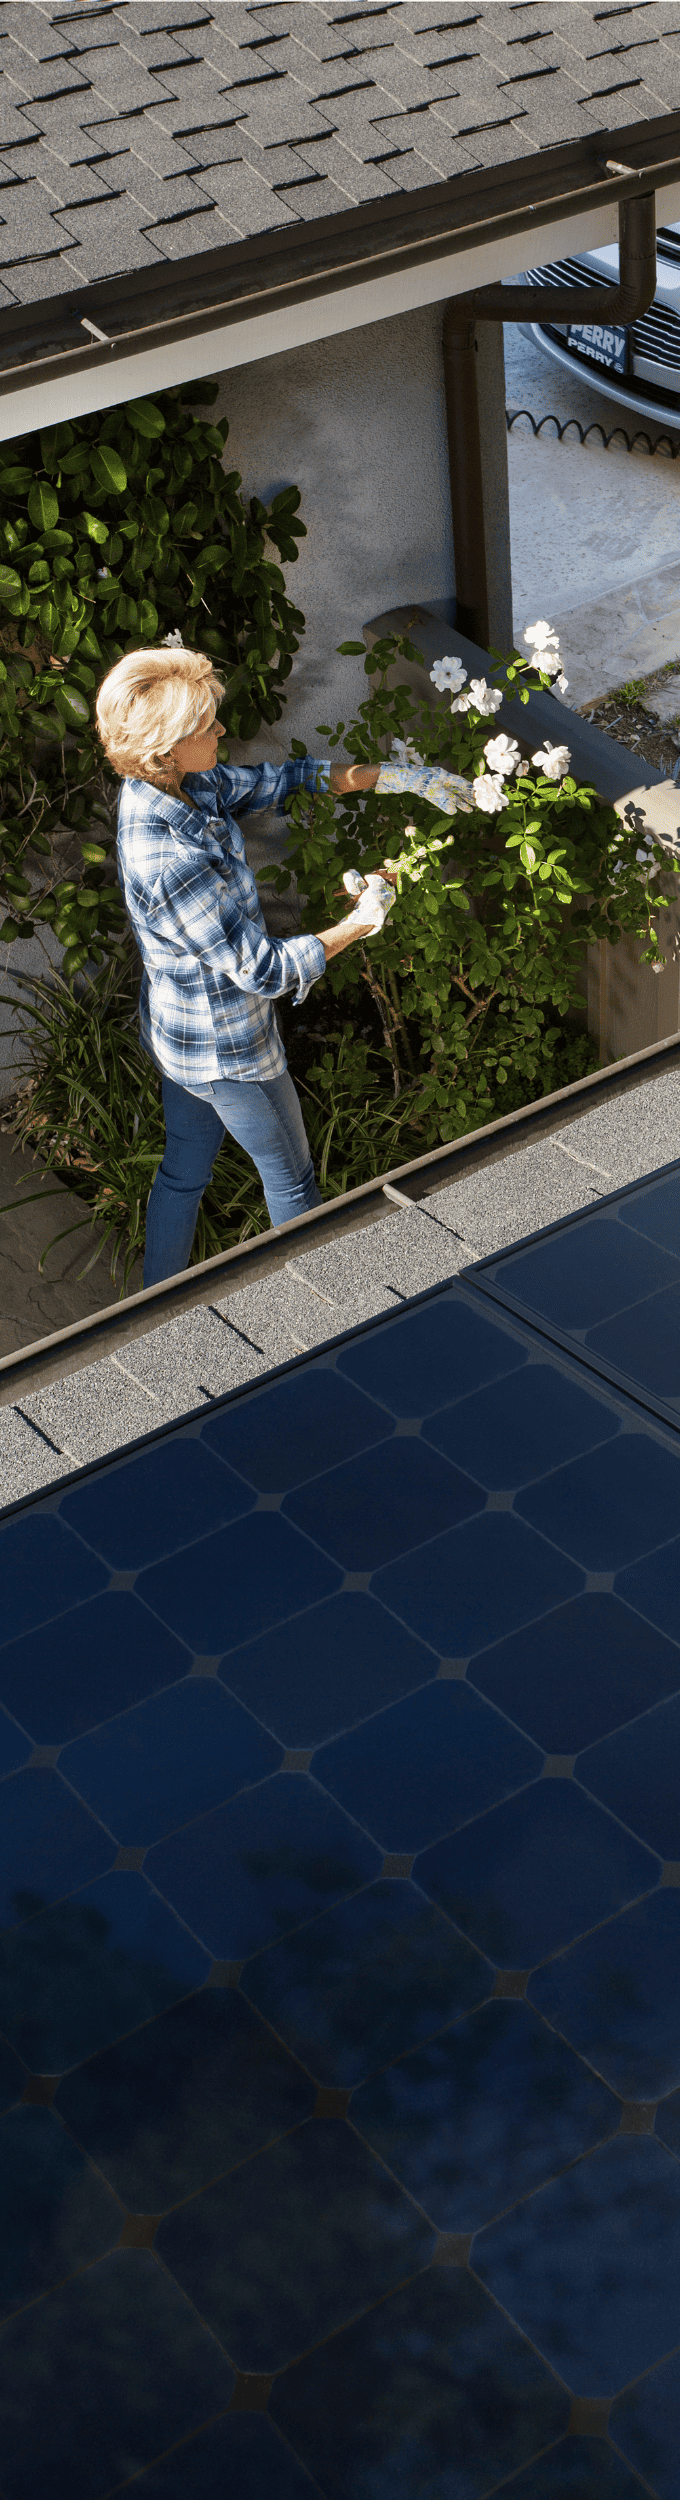 Woman working on plants with solar panels as the main view.